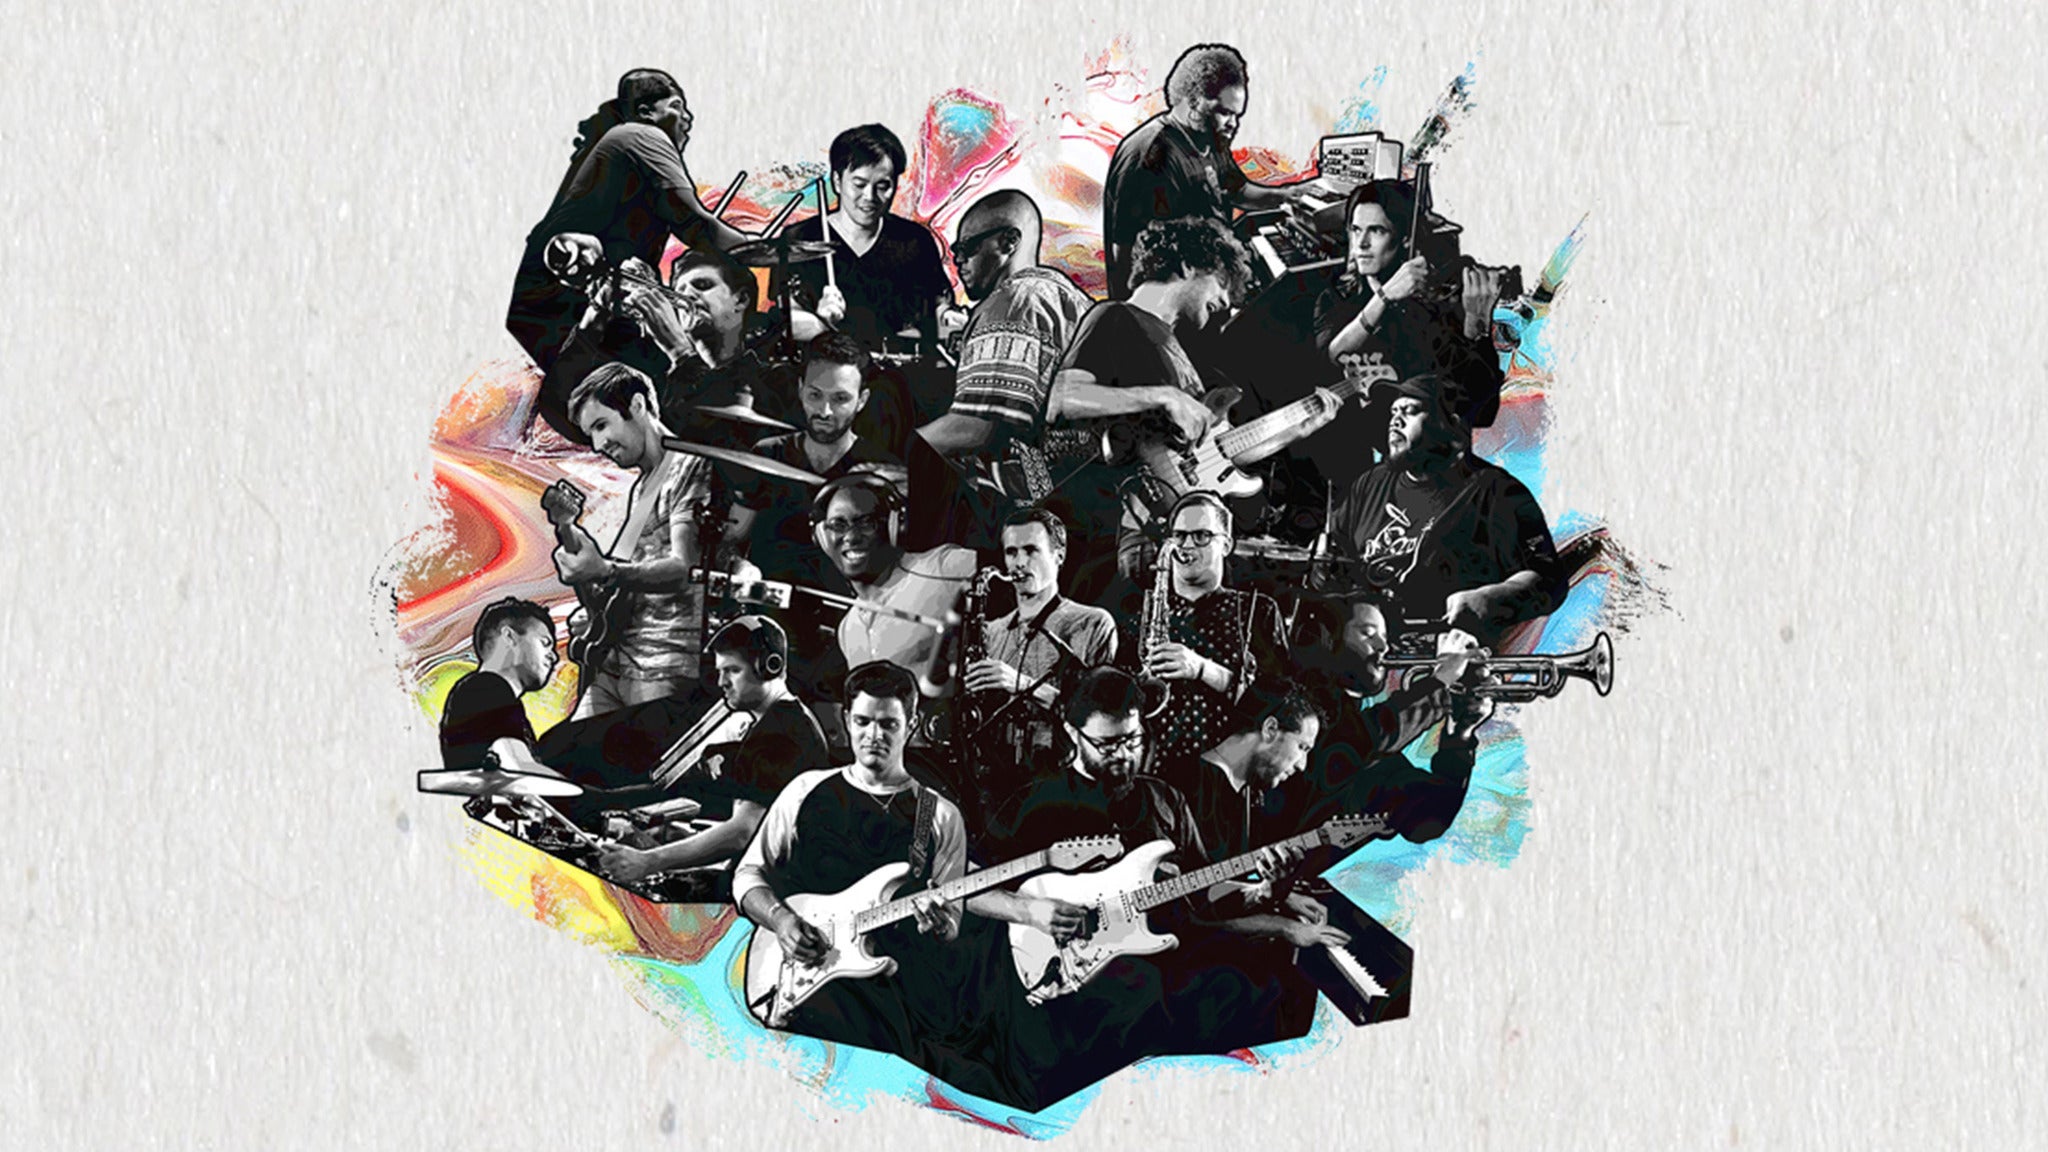 Image used with permission from Ticketmaster | Snarky Puppy tickets